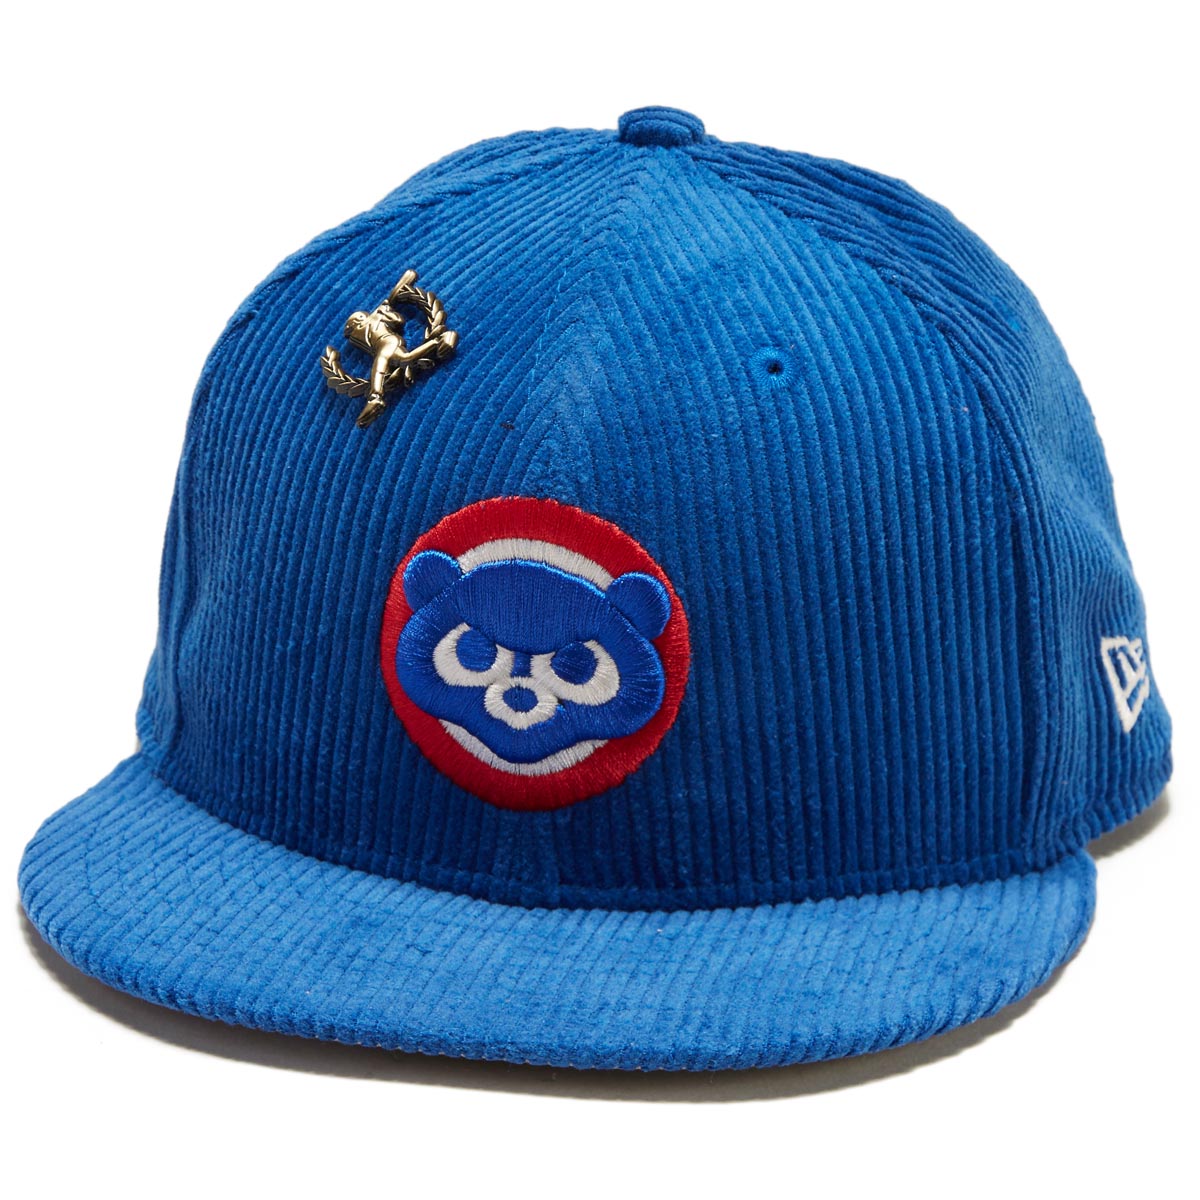 New Era 5950 Letterman Pin Hat - Chicago Cubs image 1